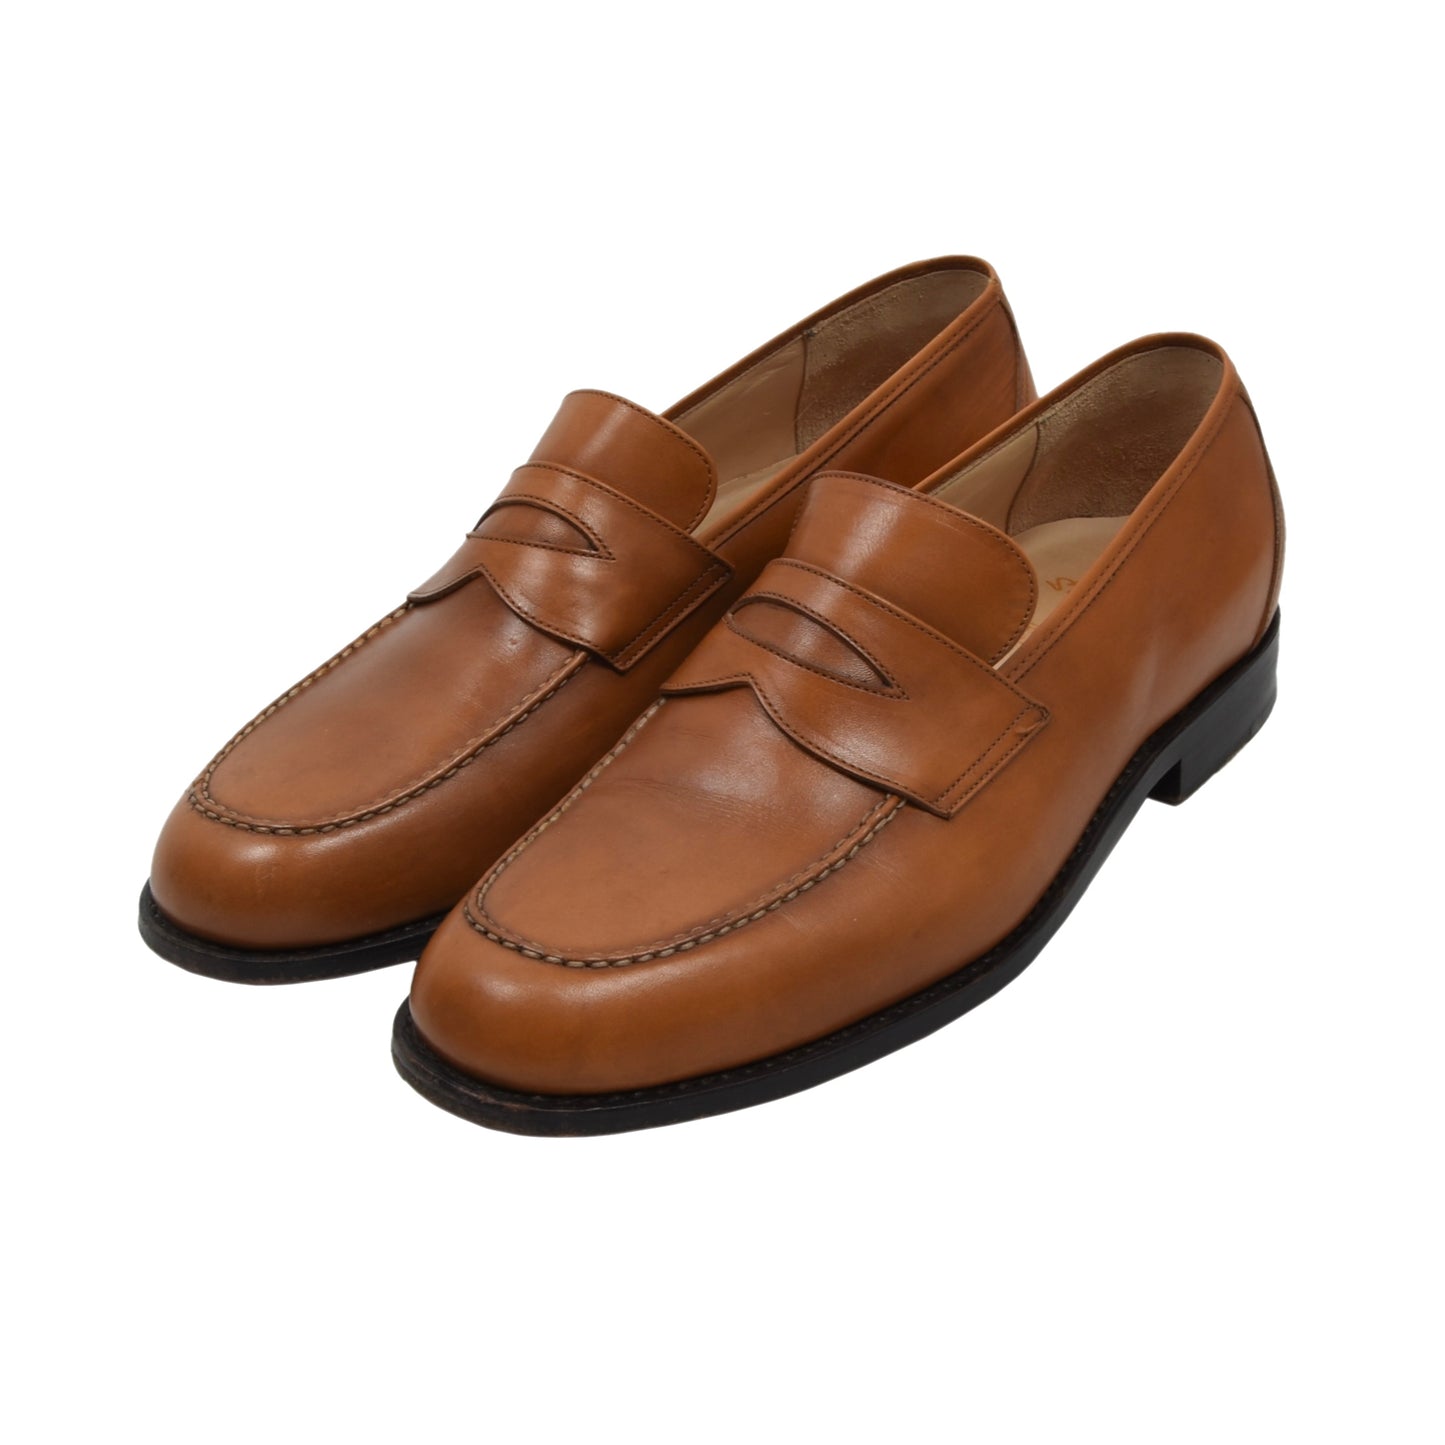 Sandor Kiss Loafers/Shoes Size 44 9 1/2 - Brown